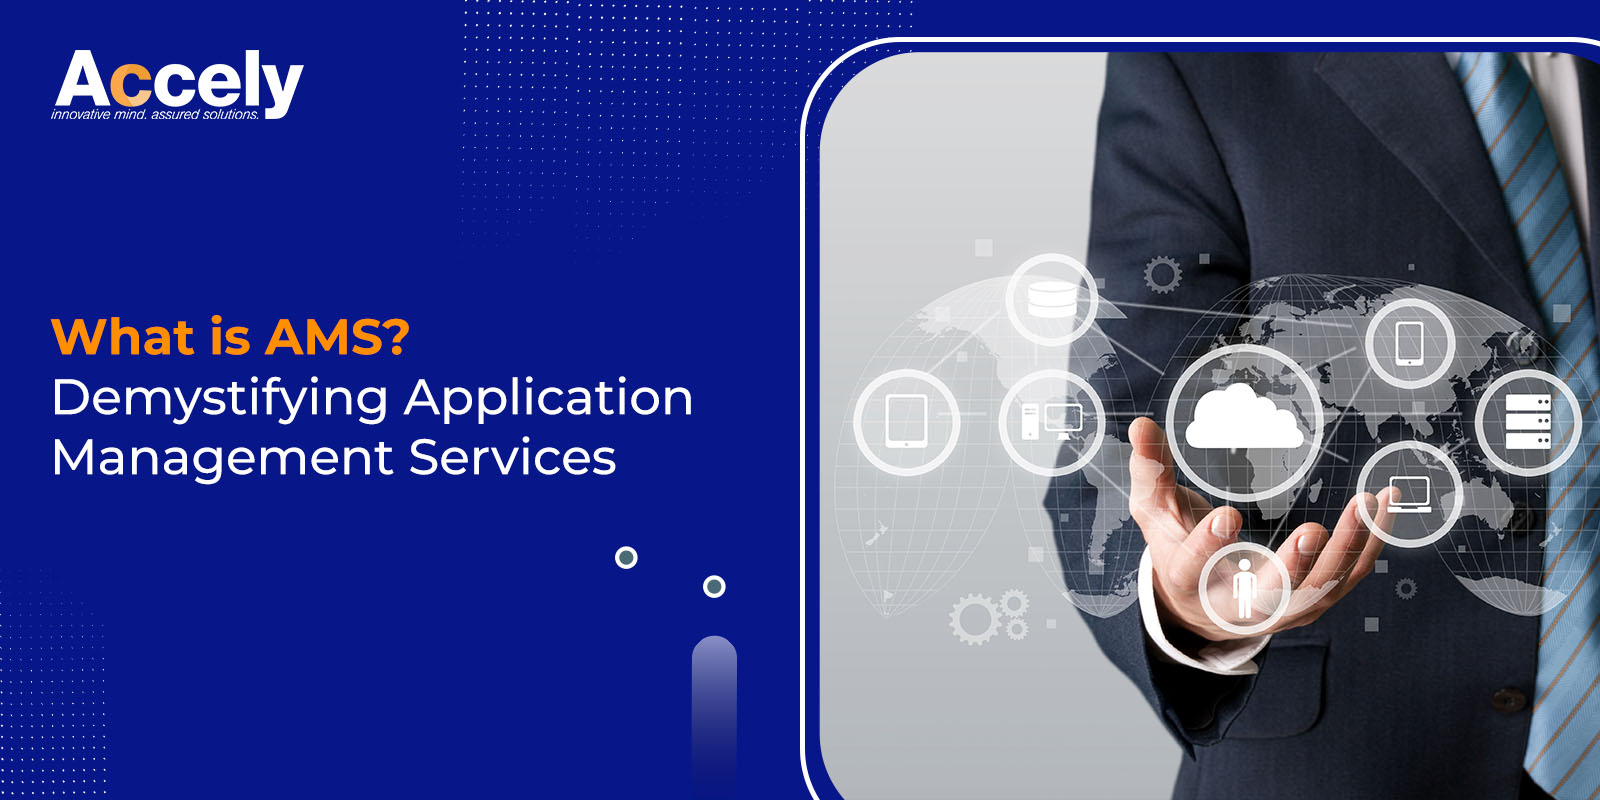 What is AMS? Demystifying Application Management Services